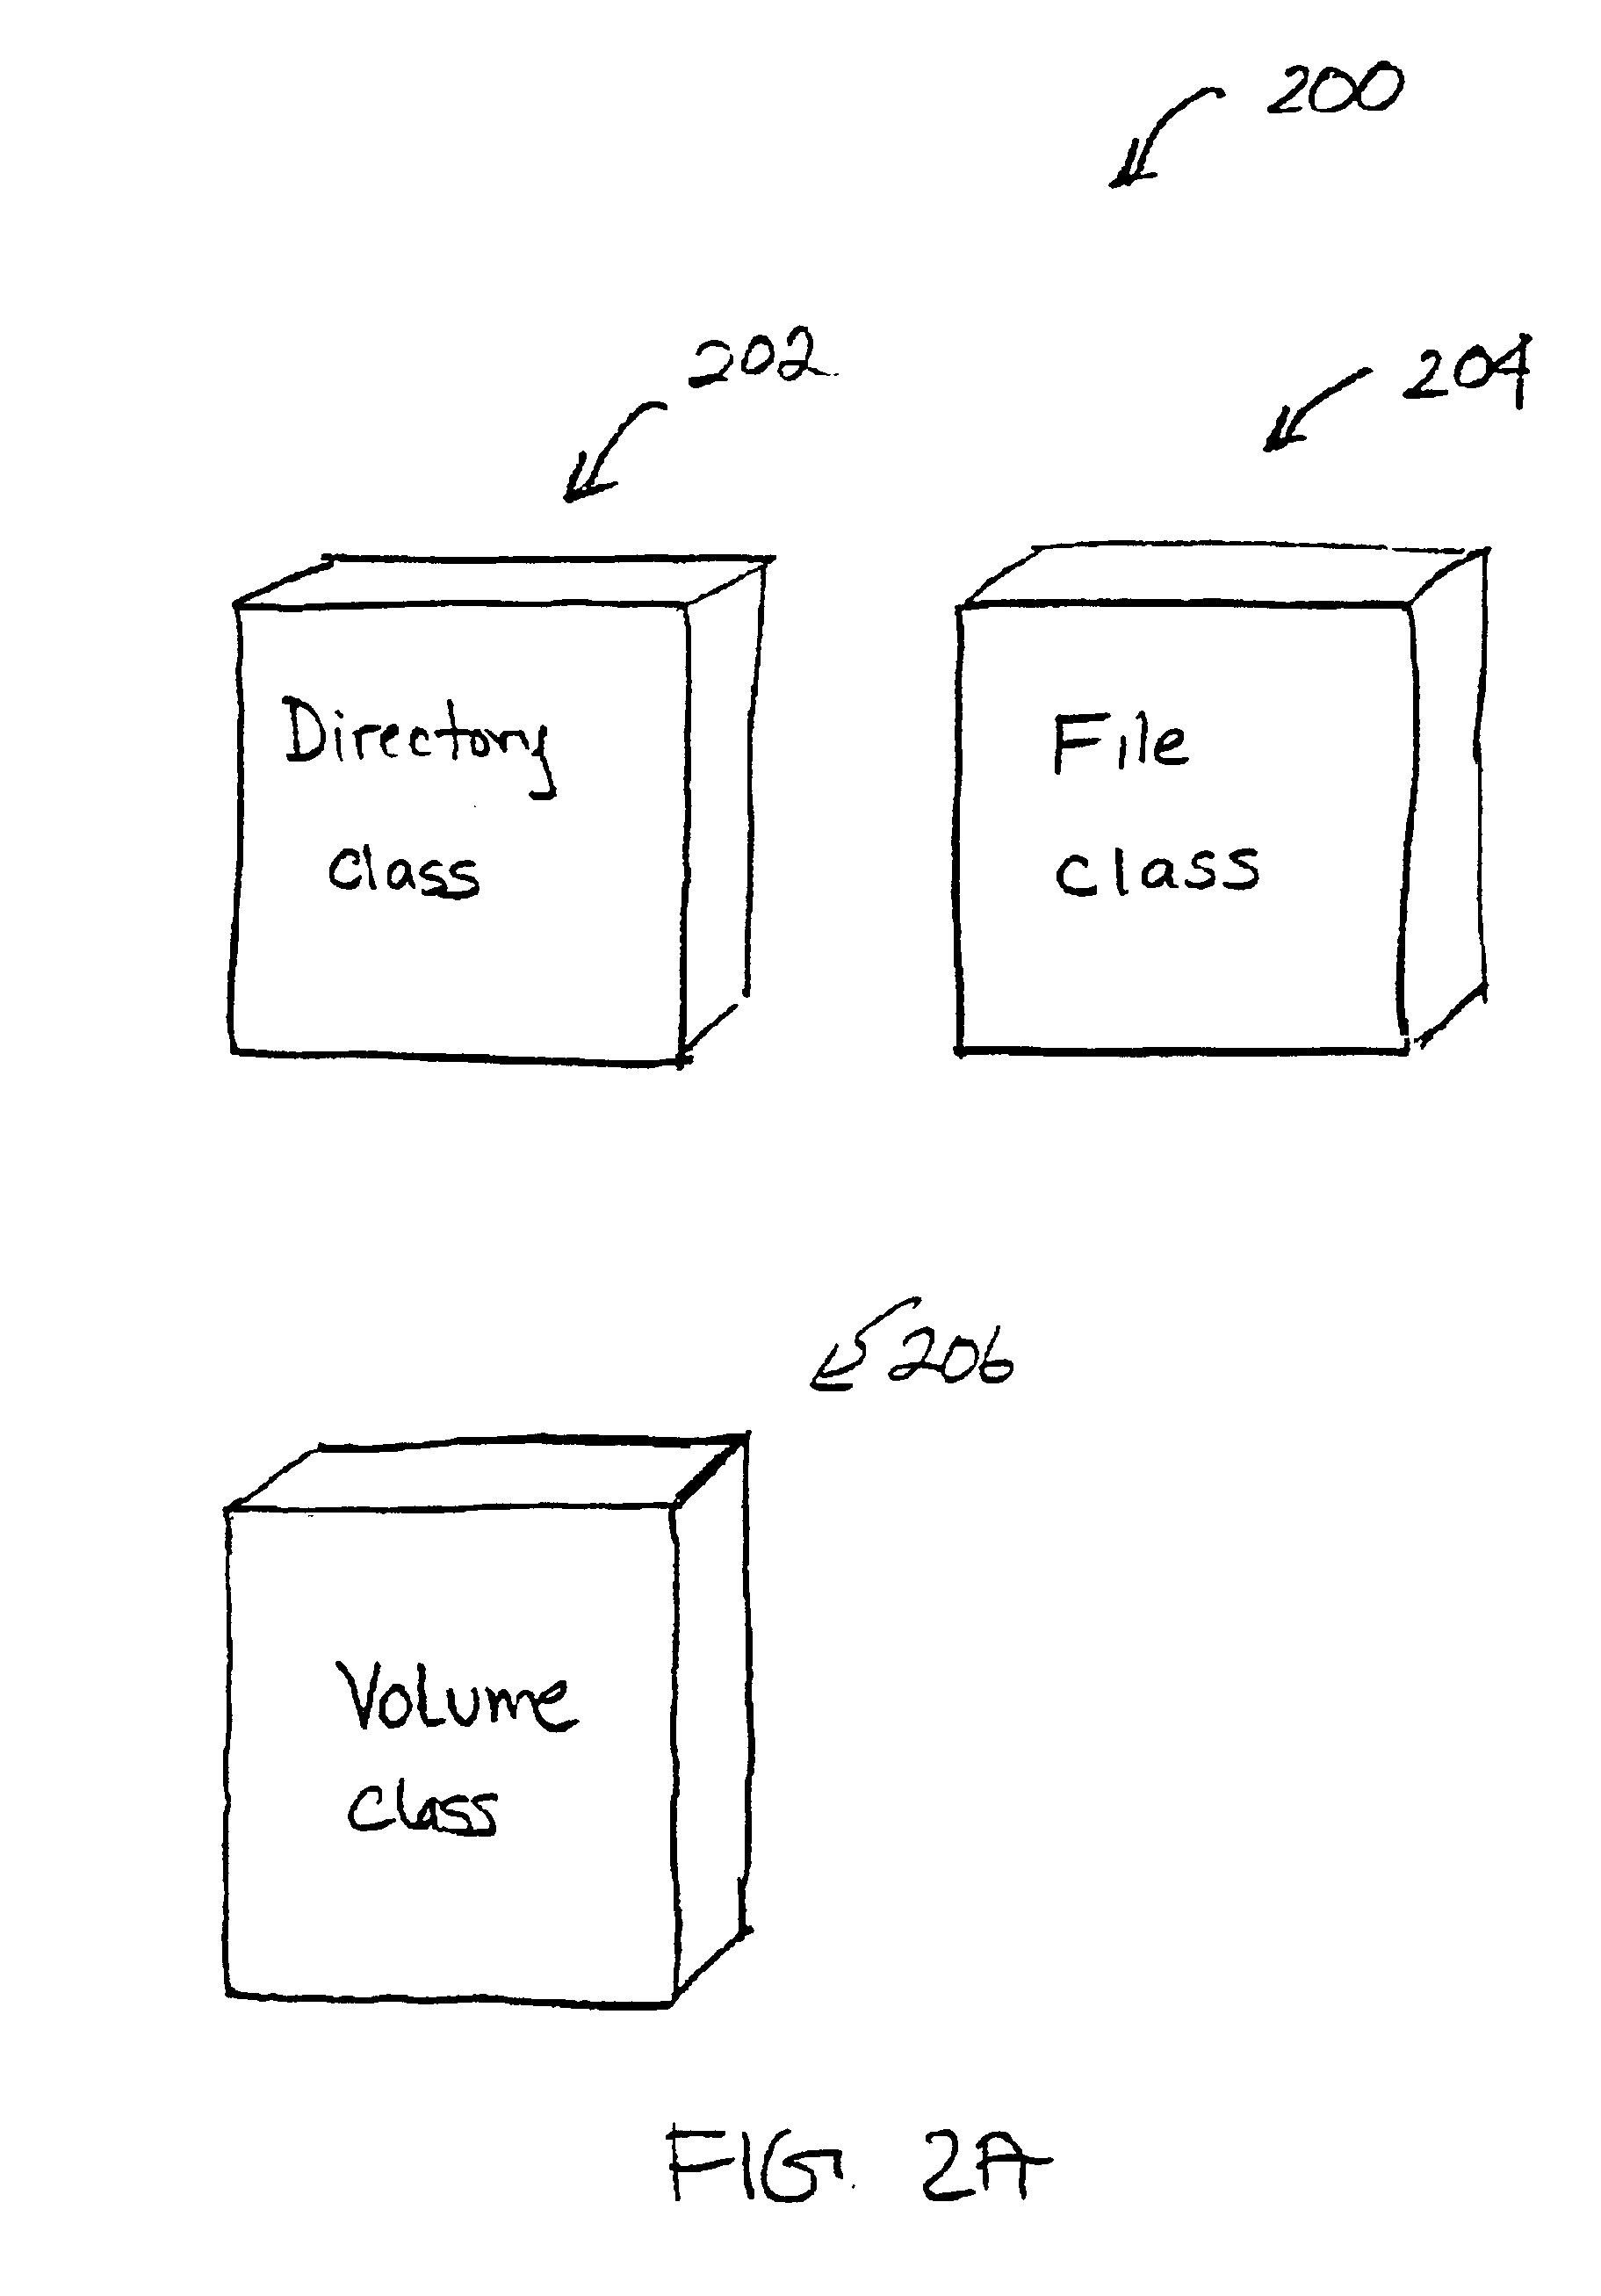 File system translators and methods for implementing the same